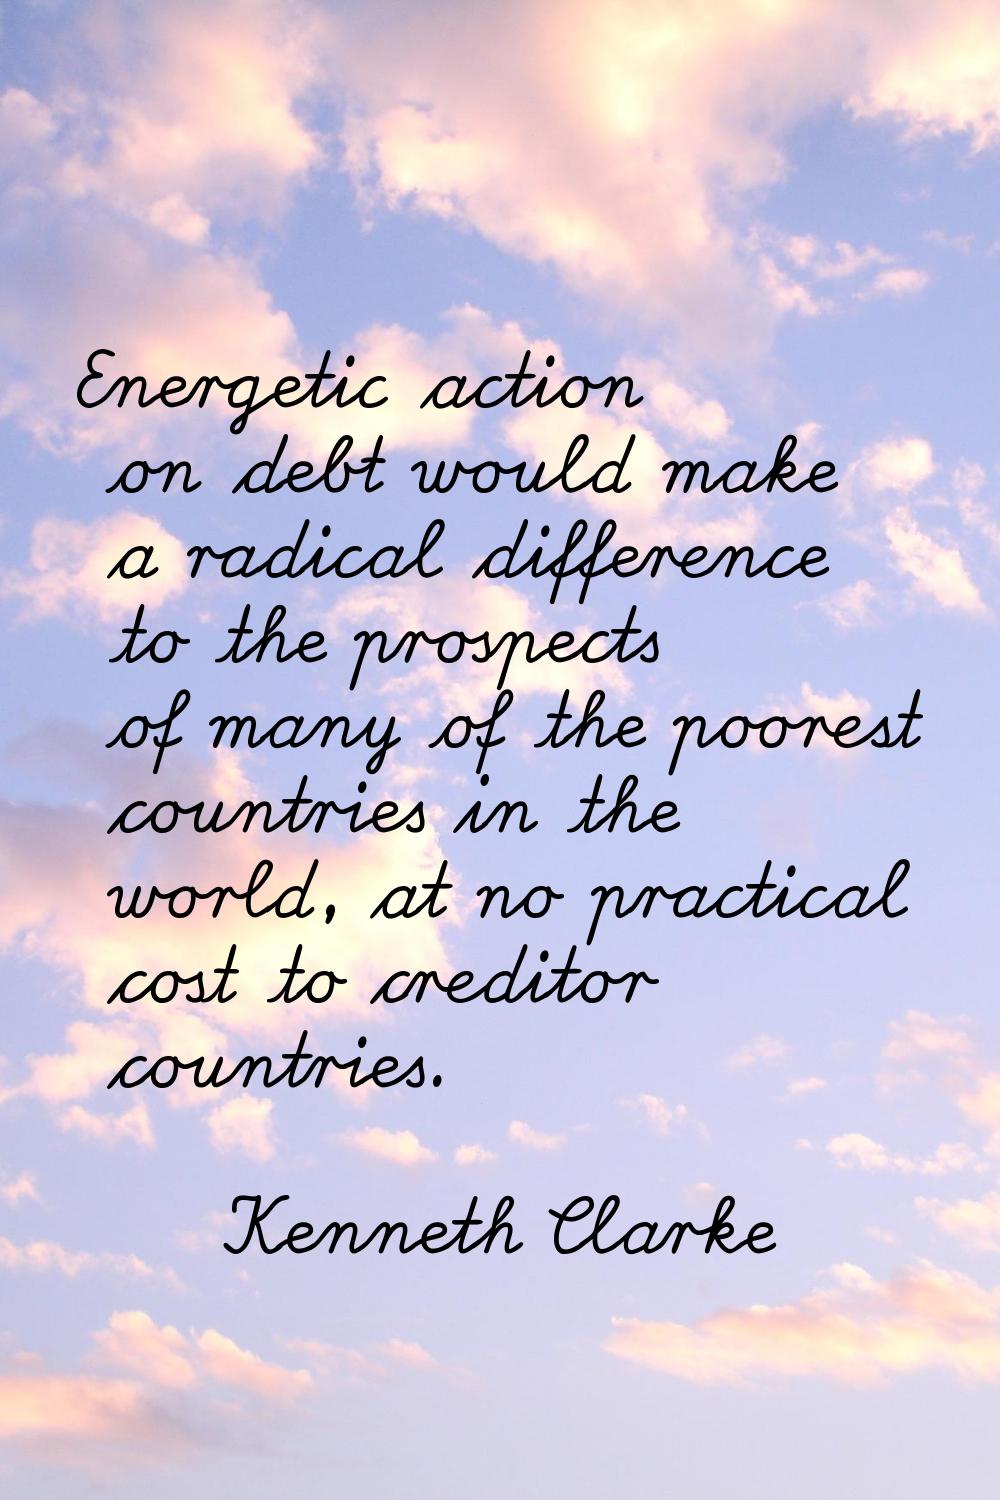 Energetic action on debt would make a radical difference to the prospects of many of the poorest co